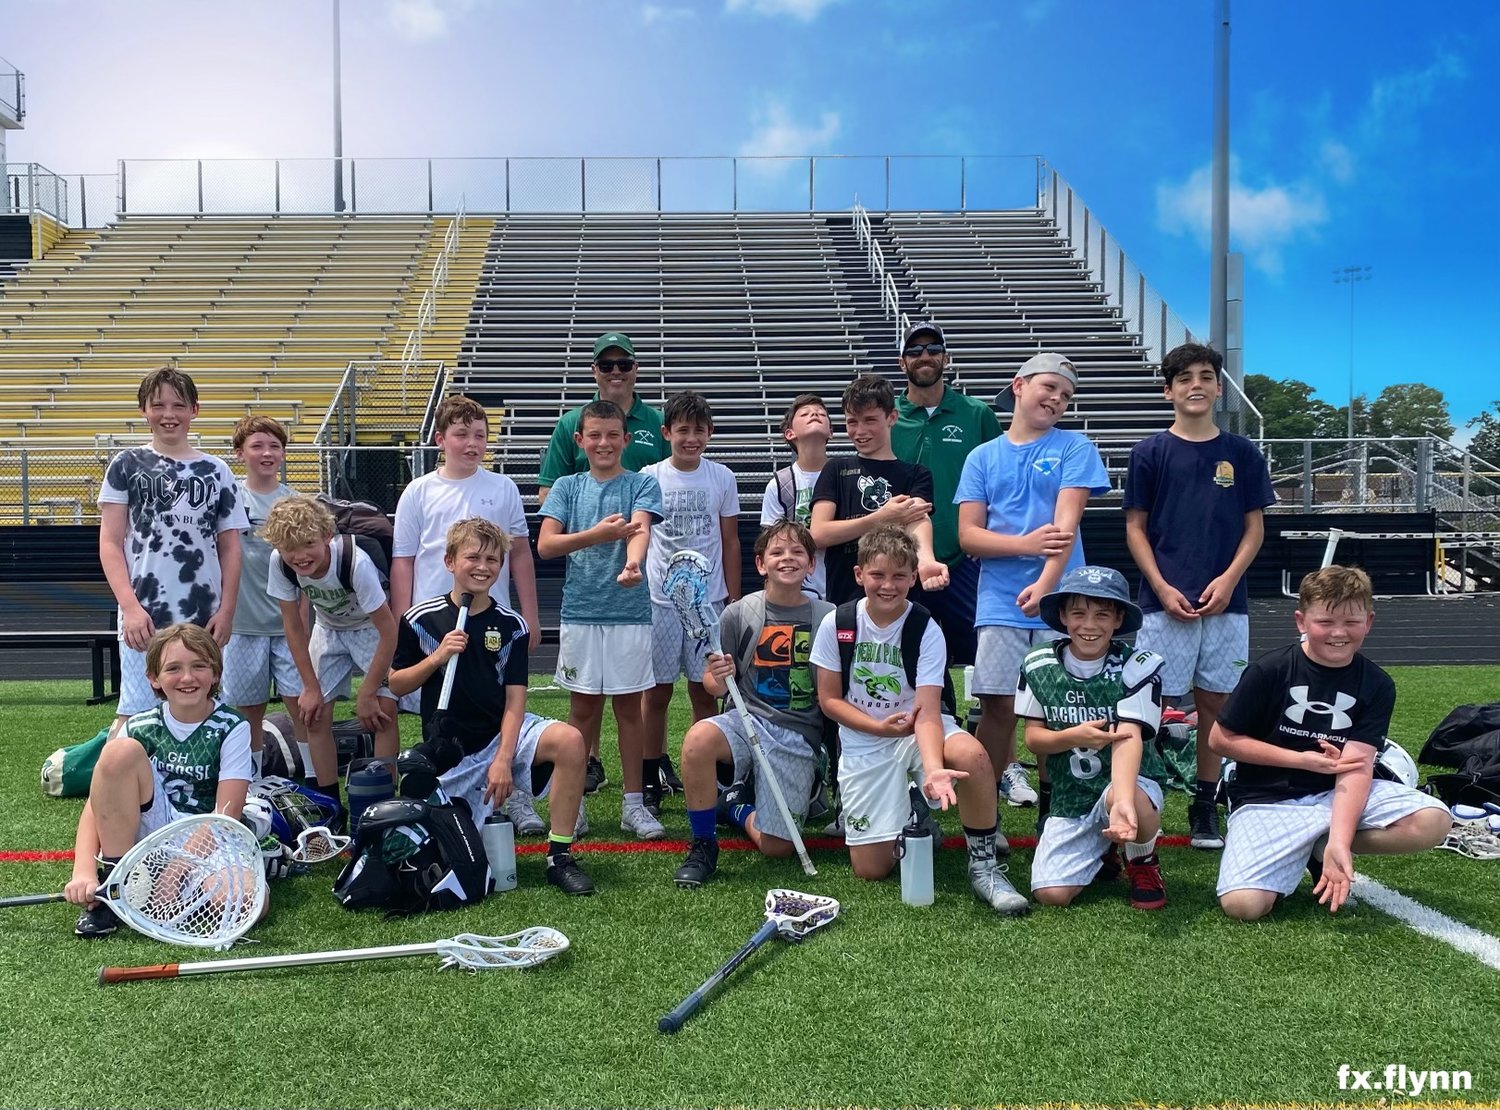 The Green Hornets beat the archrival Arden Diamondbacks 2-1 early in the season and tied them 1-1 on the last game of the season to secure the championship.